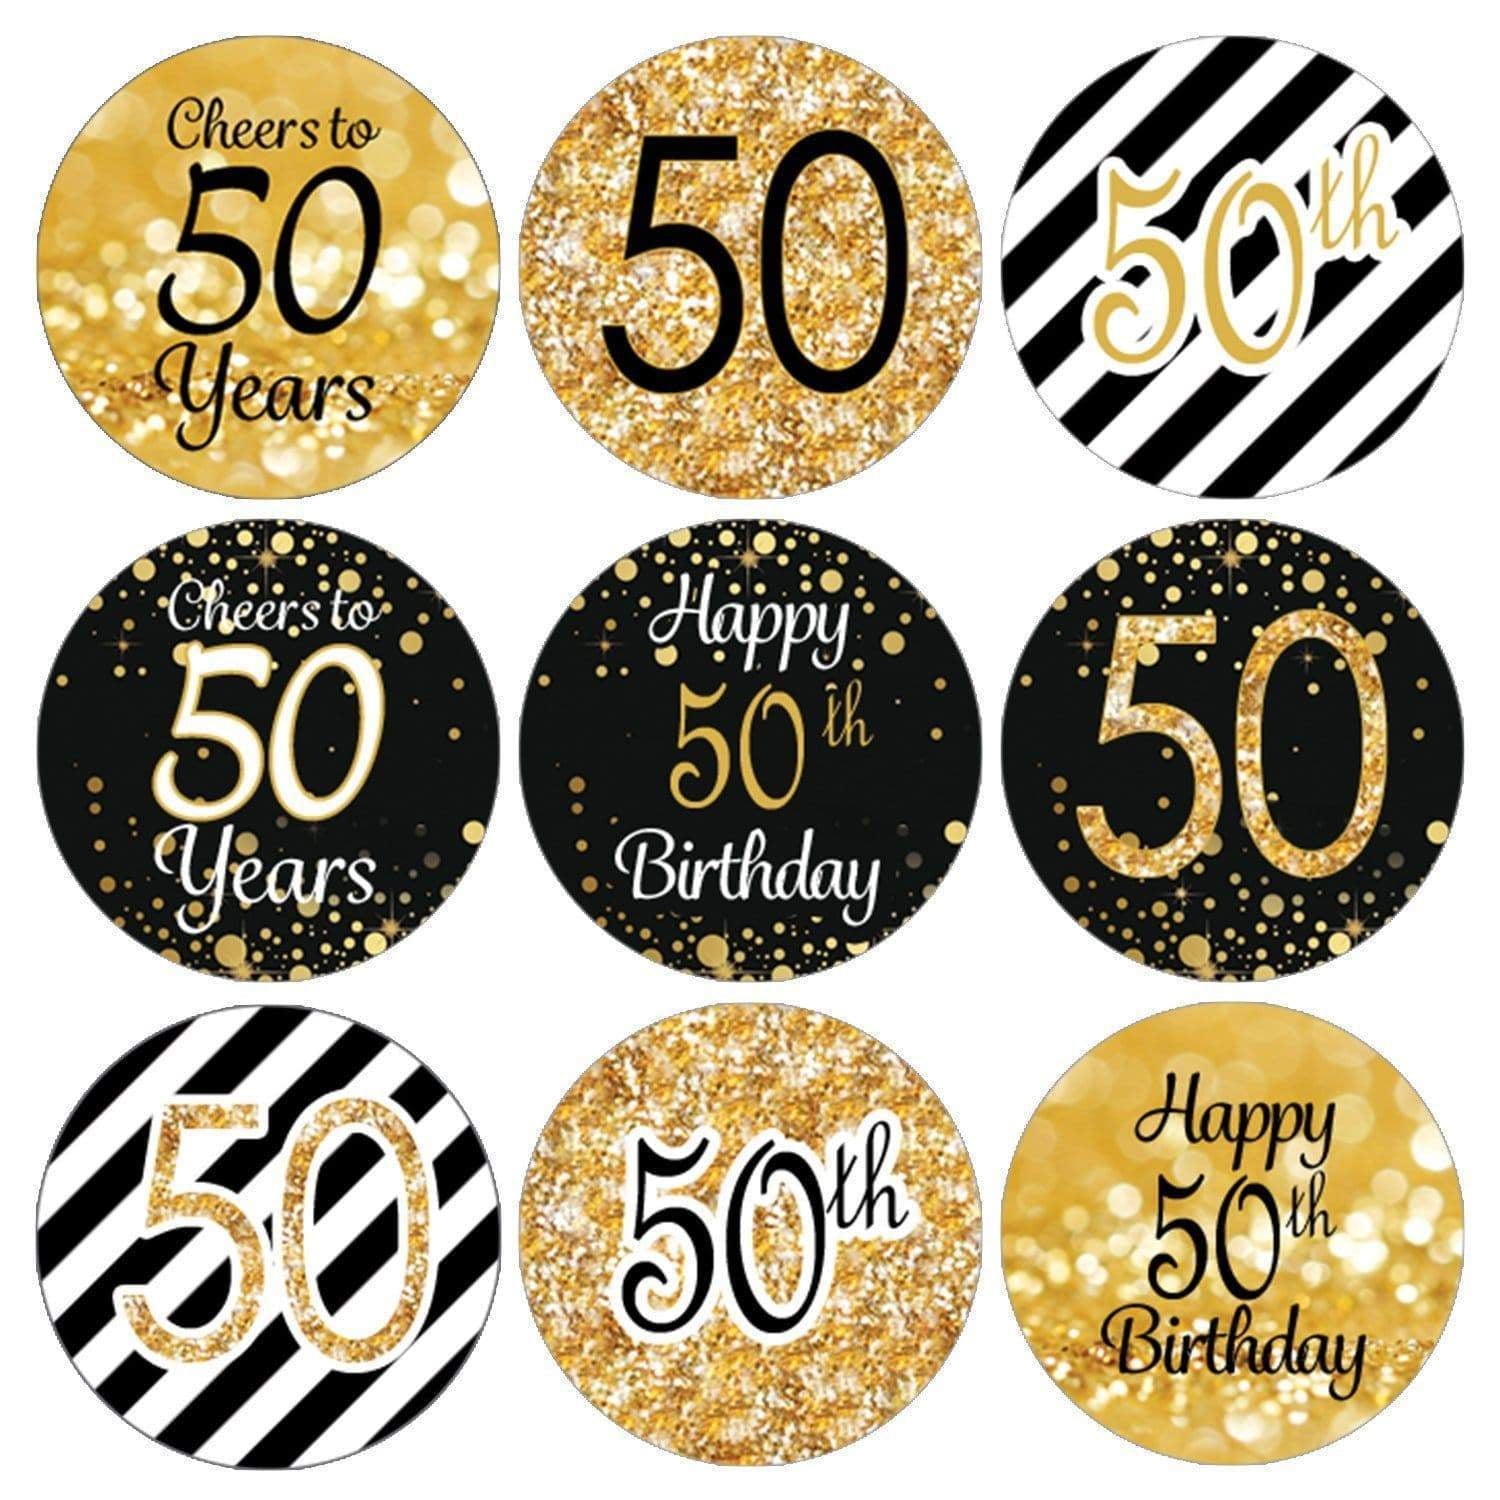 First Birthday stickers party favours boys and girls cute envelope seals x 50